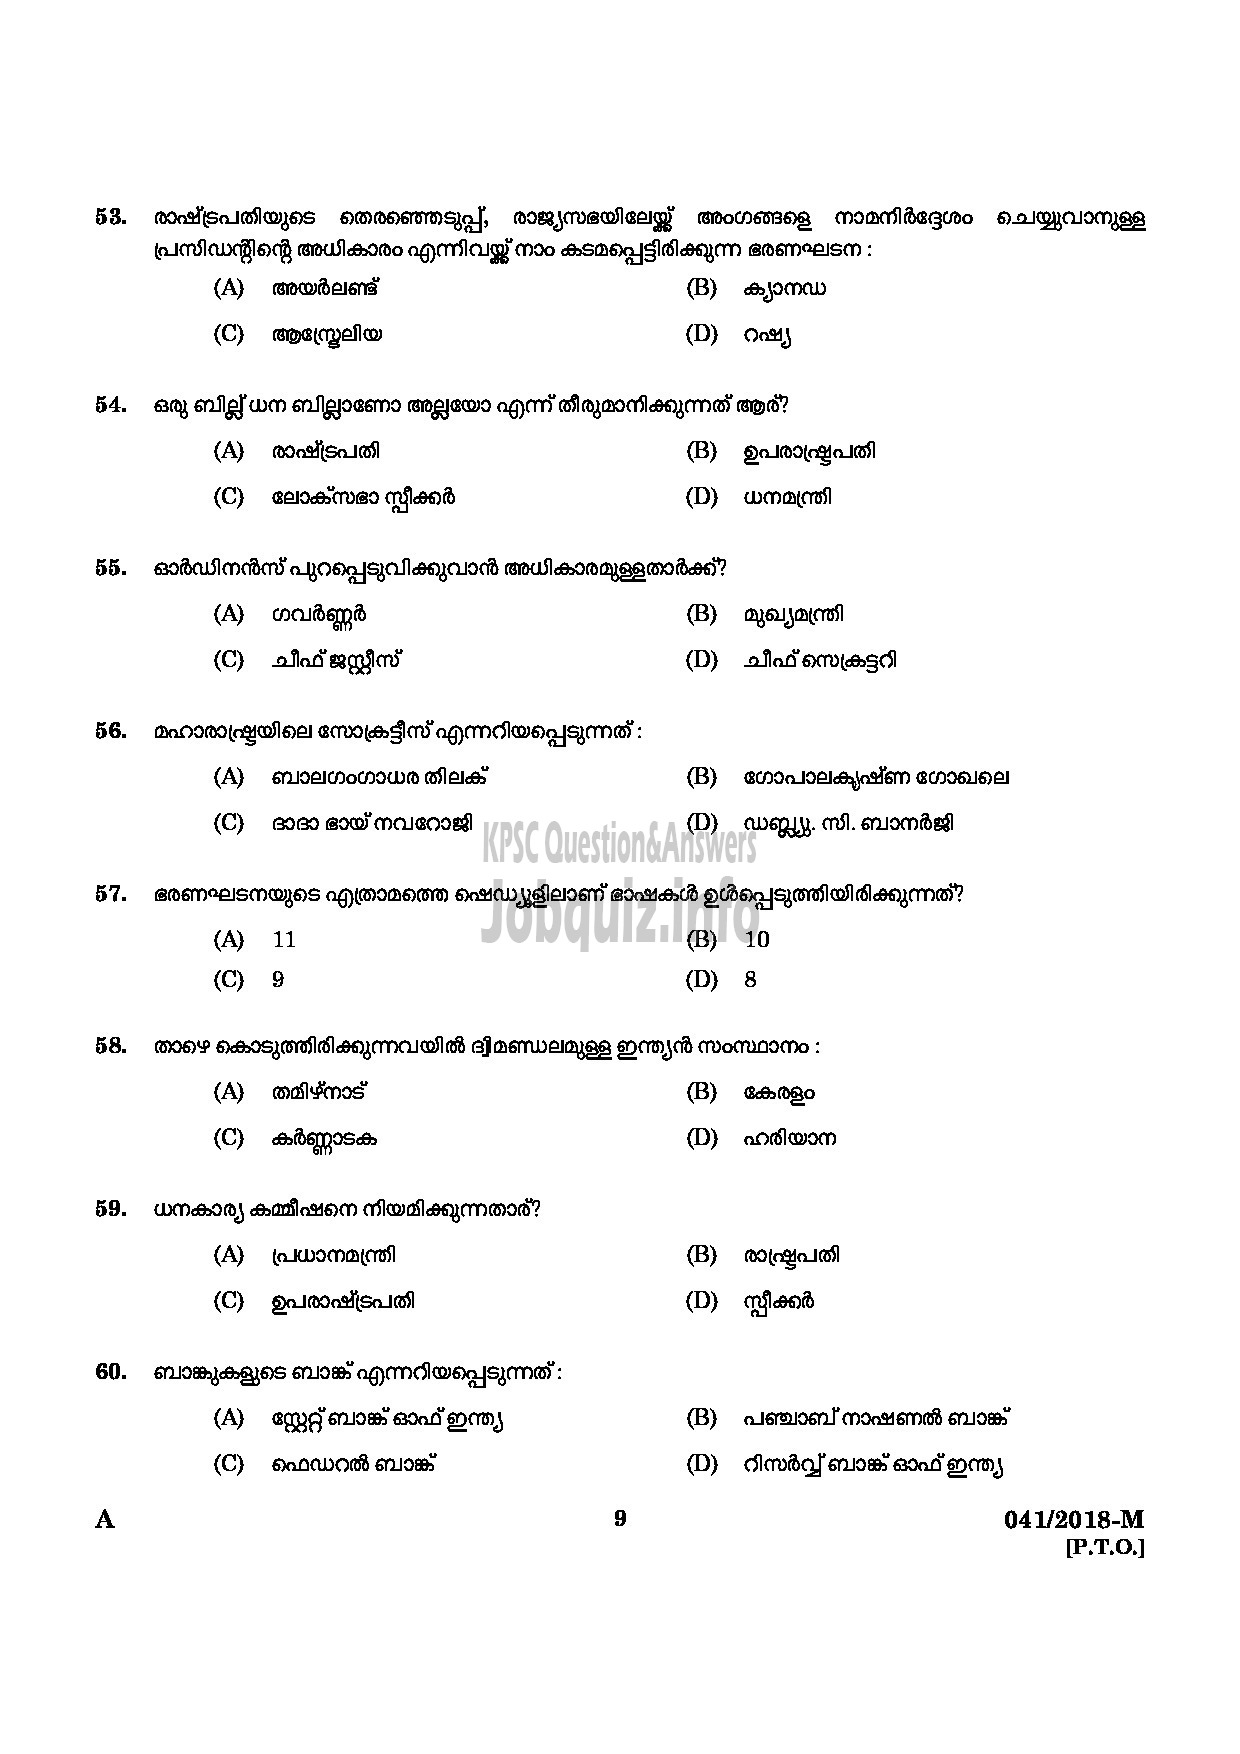 Kerala PSC Question Paper - WOMEN POLICE CONSTABLE NCA LC/AI AND MUSLIM POLICE MALAYALAM-7